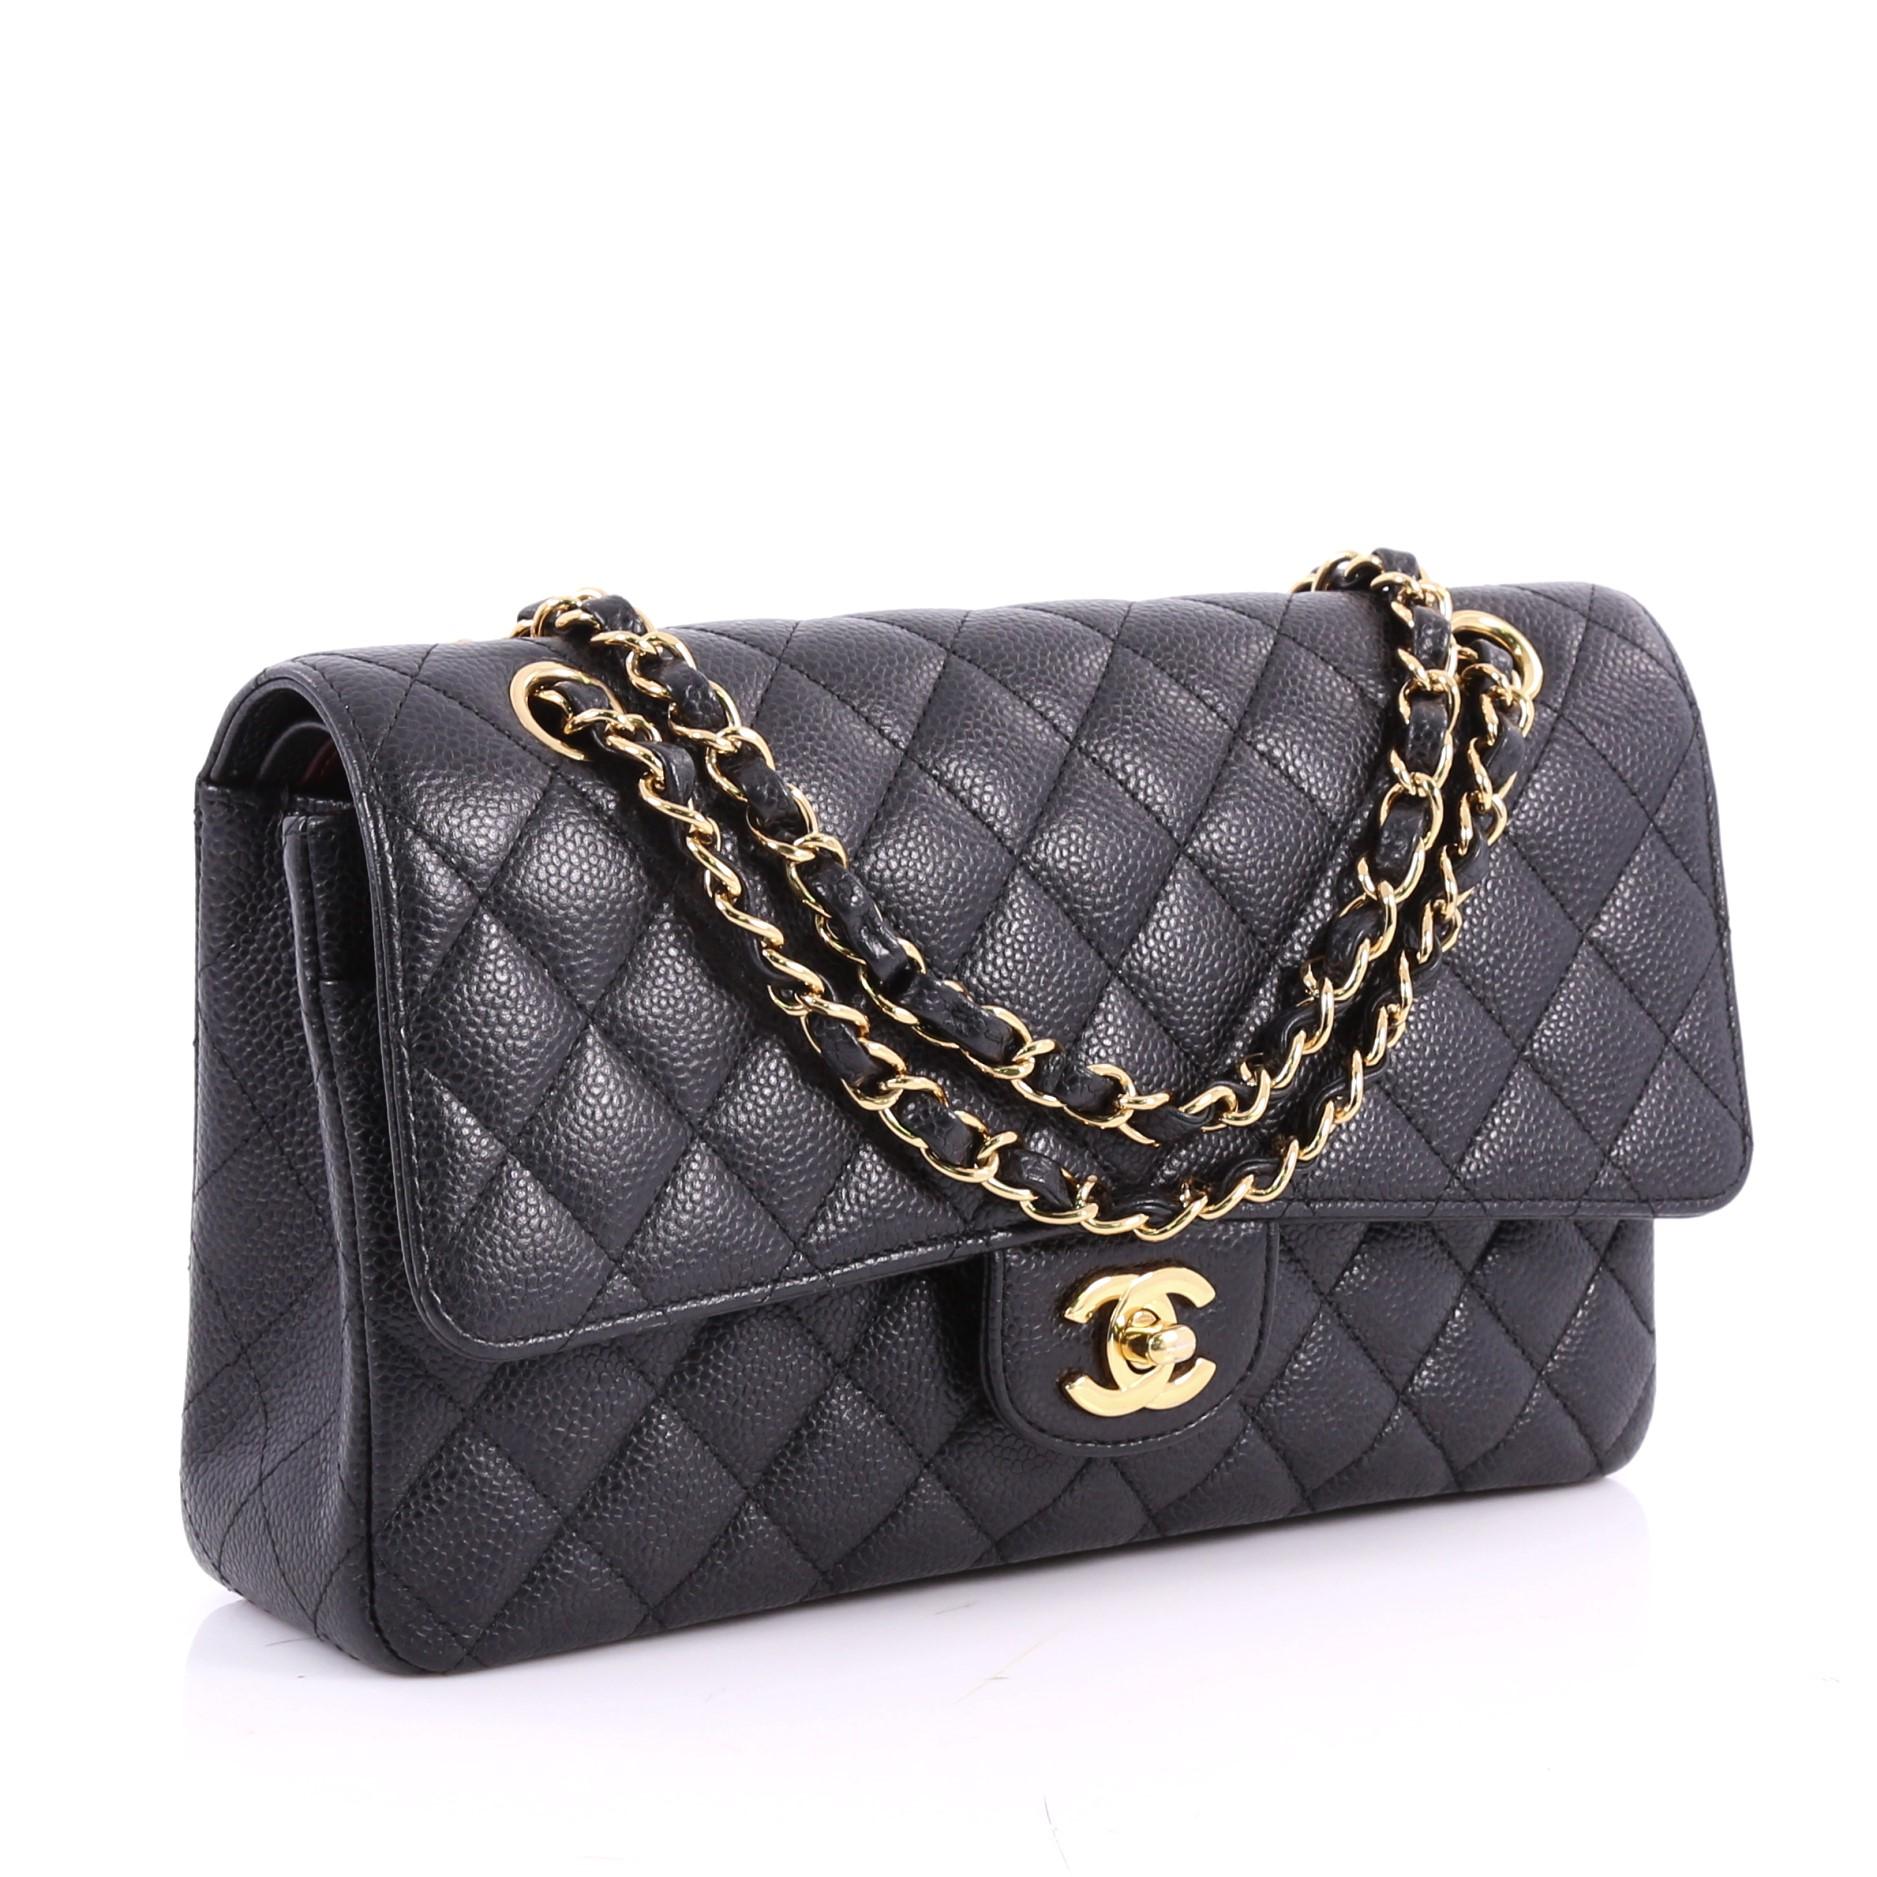 Black Chanel Classic Double Flap Bag Quilted Caviar Medium